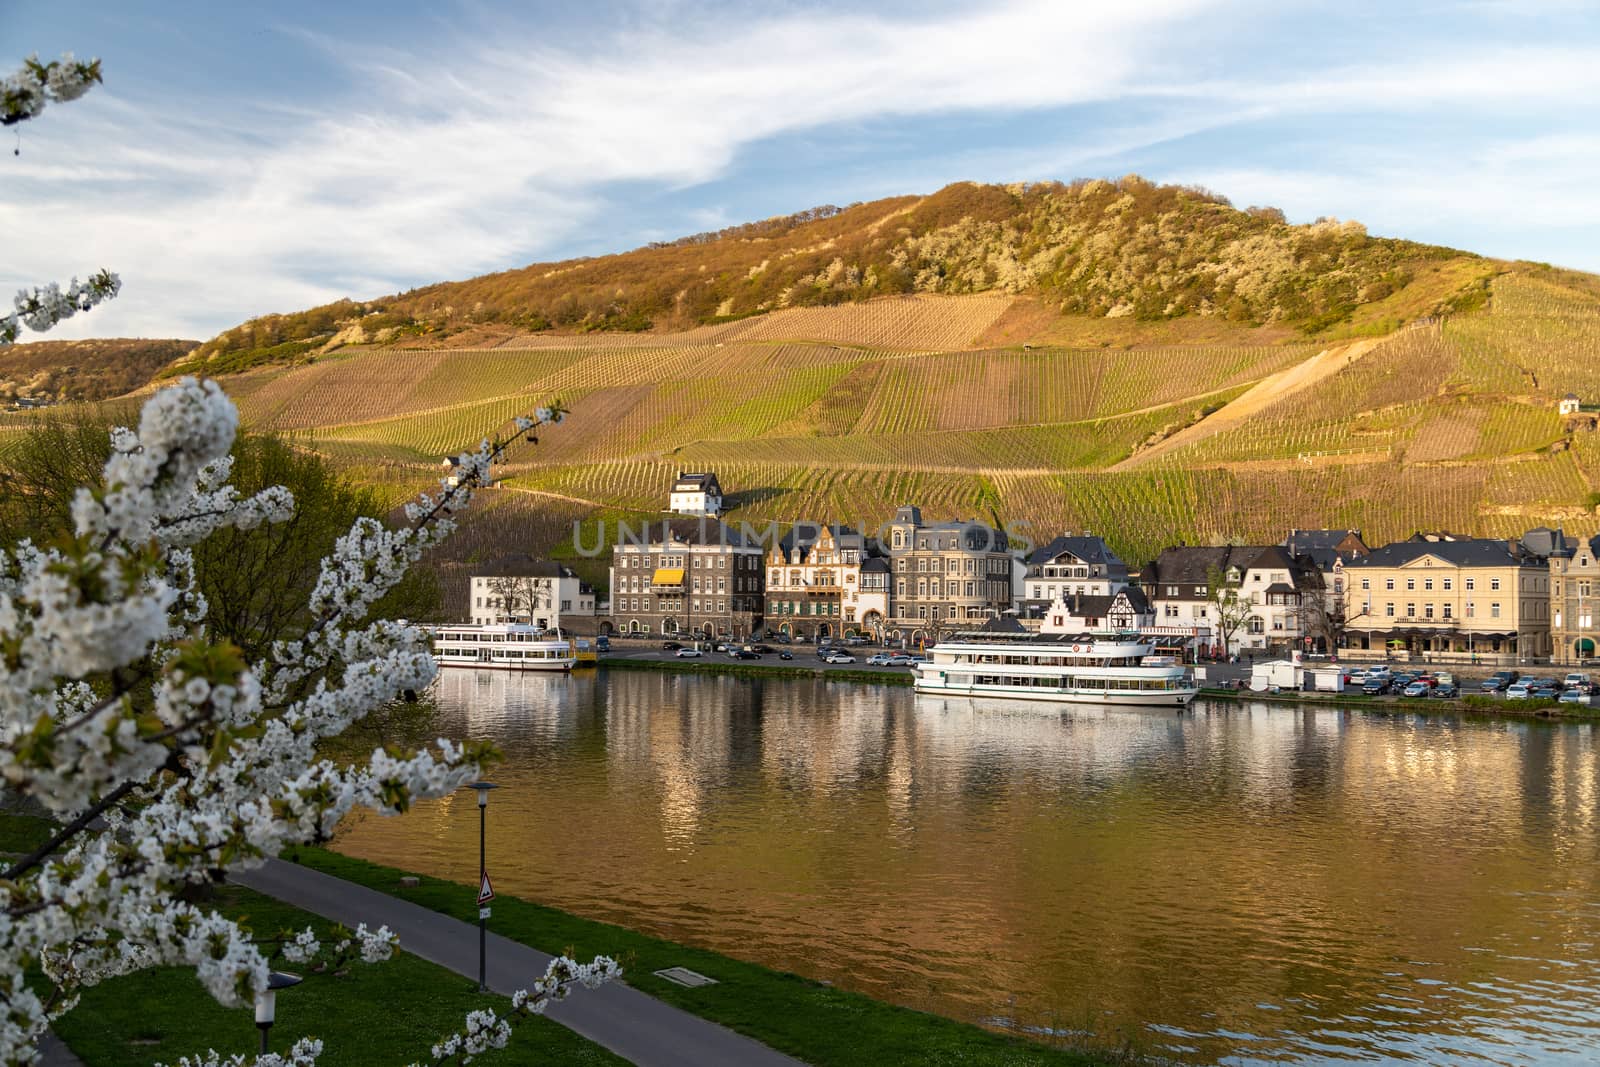 View at the city of Bernkastel-Kues at river Moselle with passenger ships and mountains with vineyards in the background